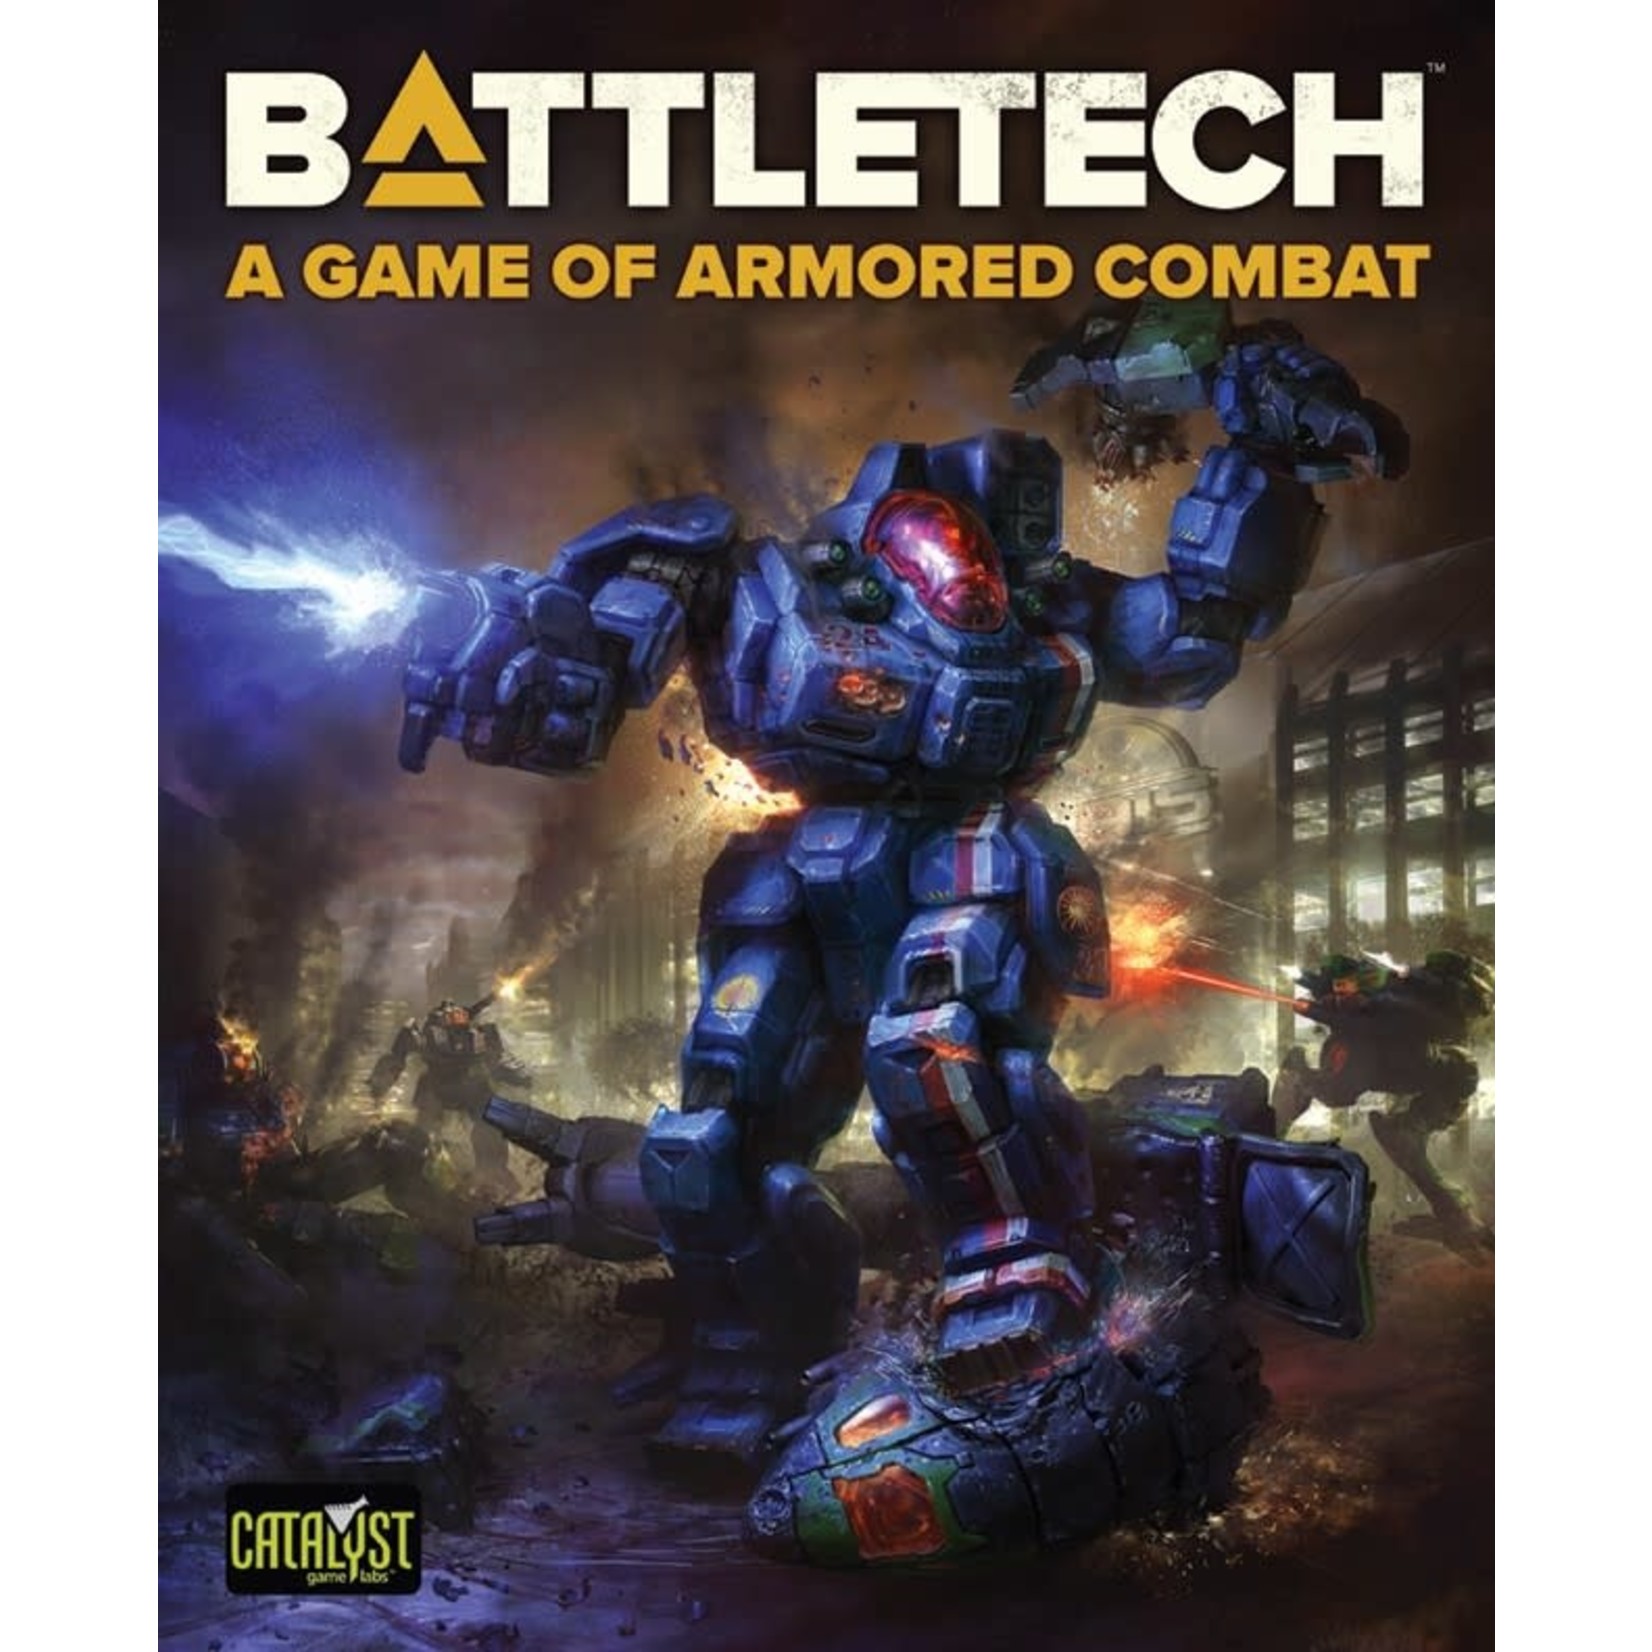 BattleTech The Game of Armored Combat